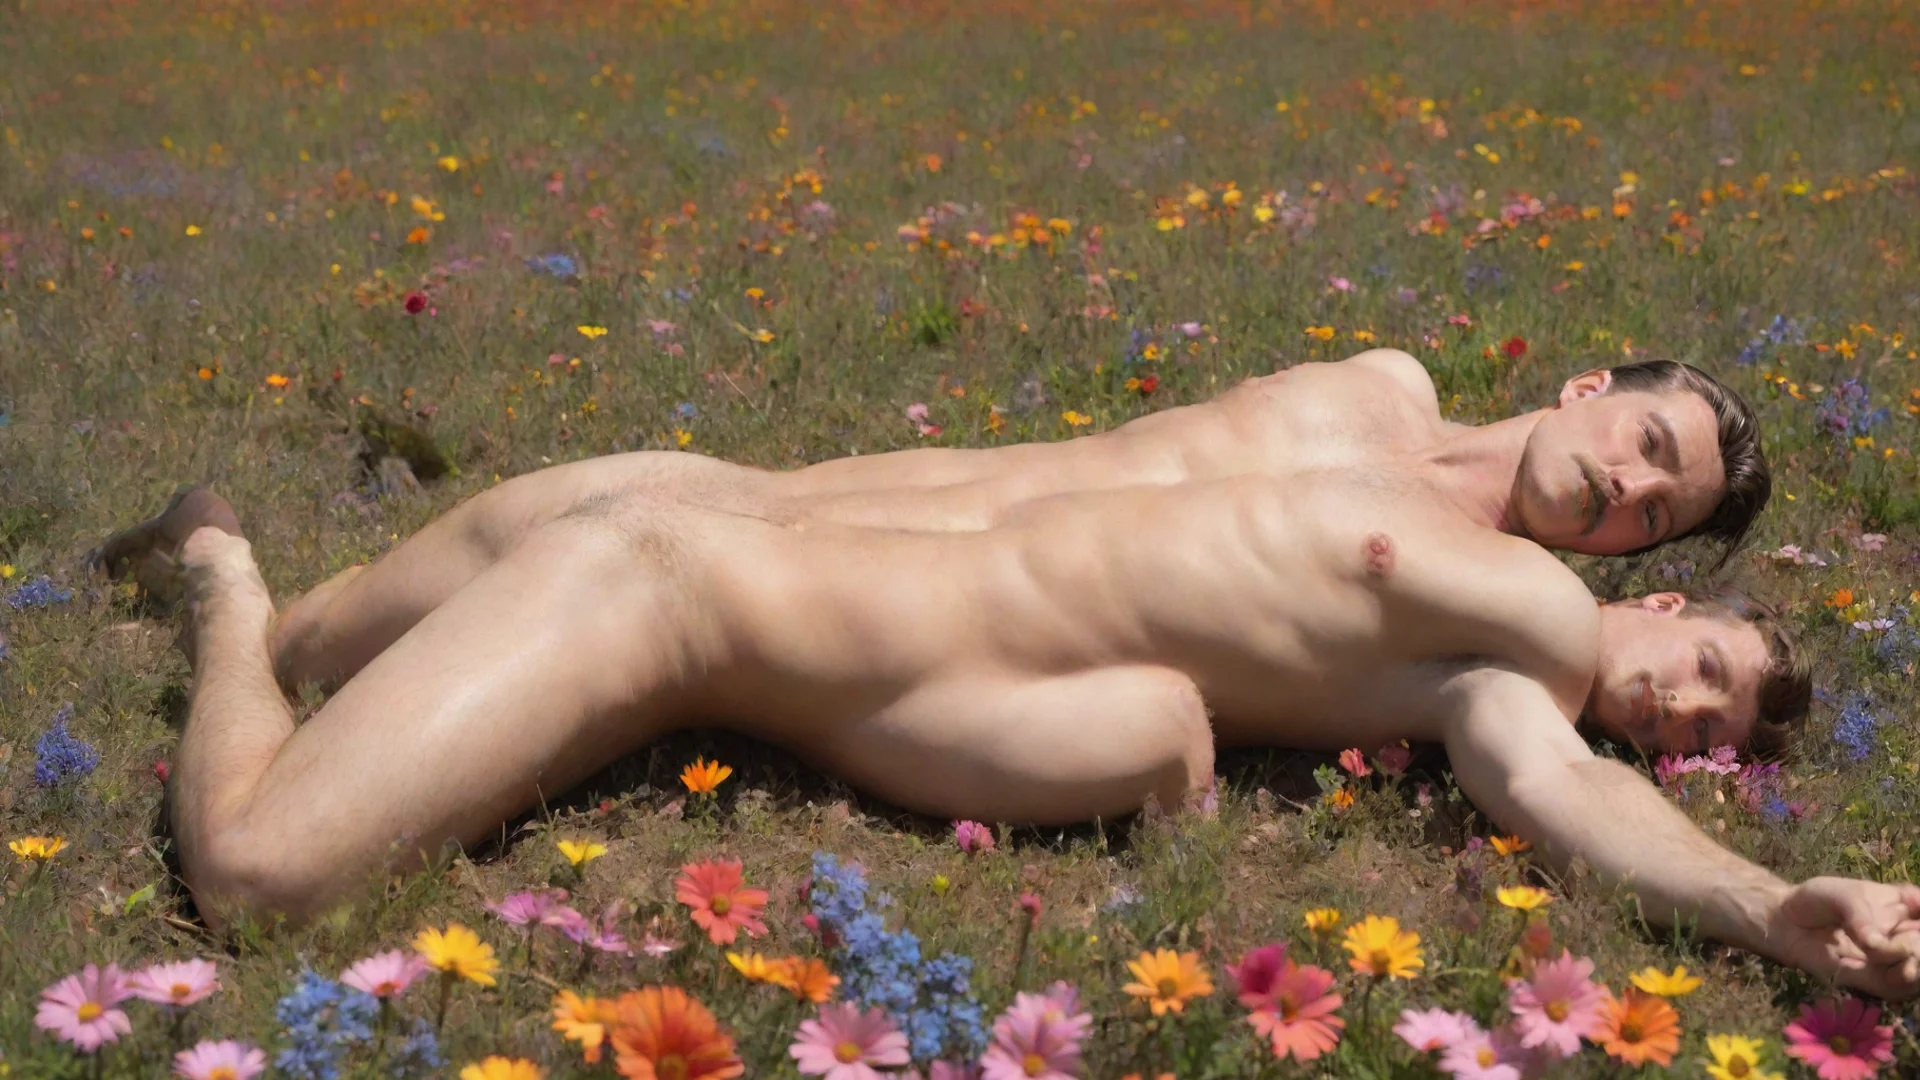 aiartstation art shirtless man lying floor in colorful meadow tom of finland style confident engaging wow 3 wide